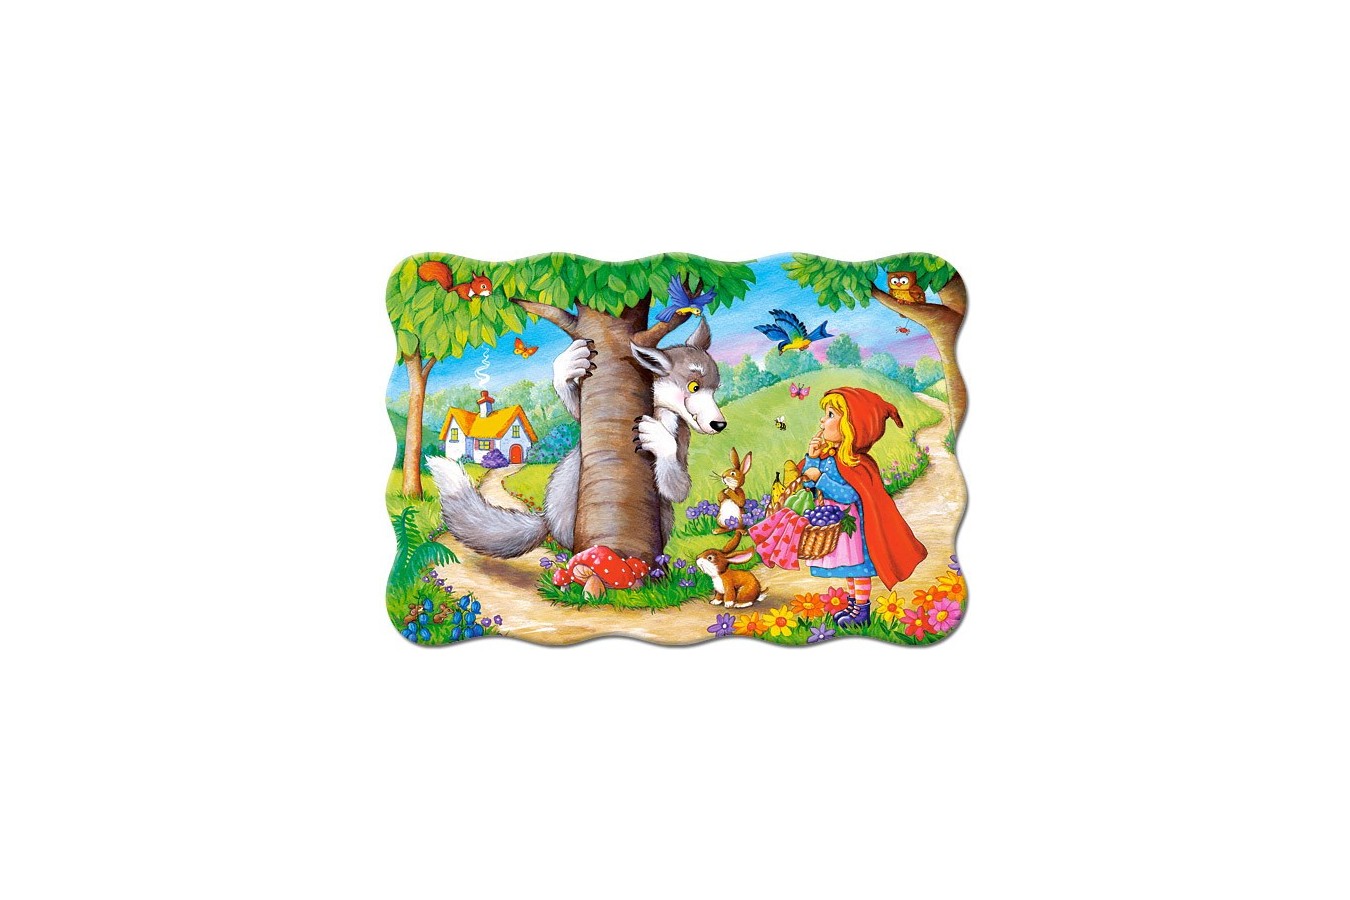 Puzzle Castorland Maxi - Little Red Riding Hood, 20 Piese